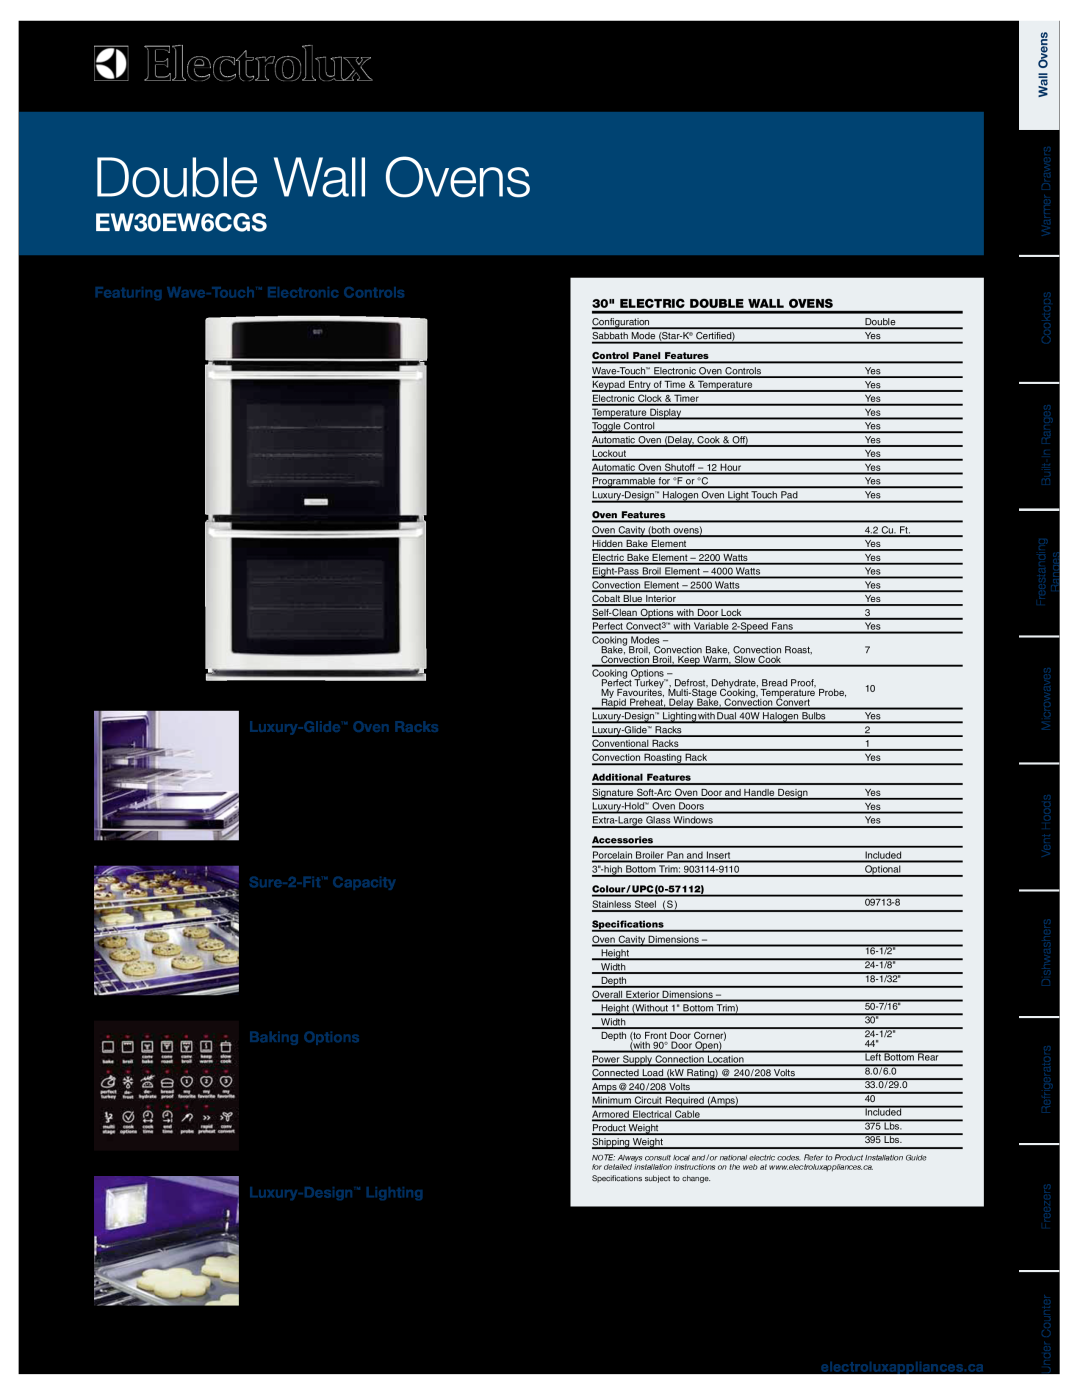 Electrolux EW30EW6CGS specifications Featuring Wave-Touch Electronic Controls Luxury-Glide Oven Racks, Sure-2-Fit Capacity 